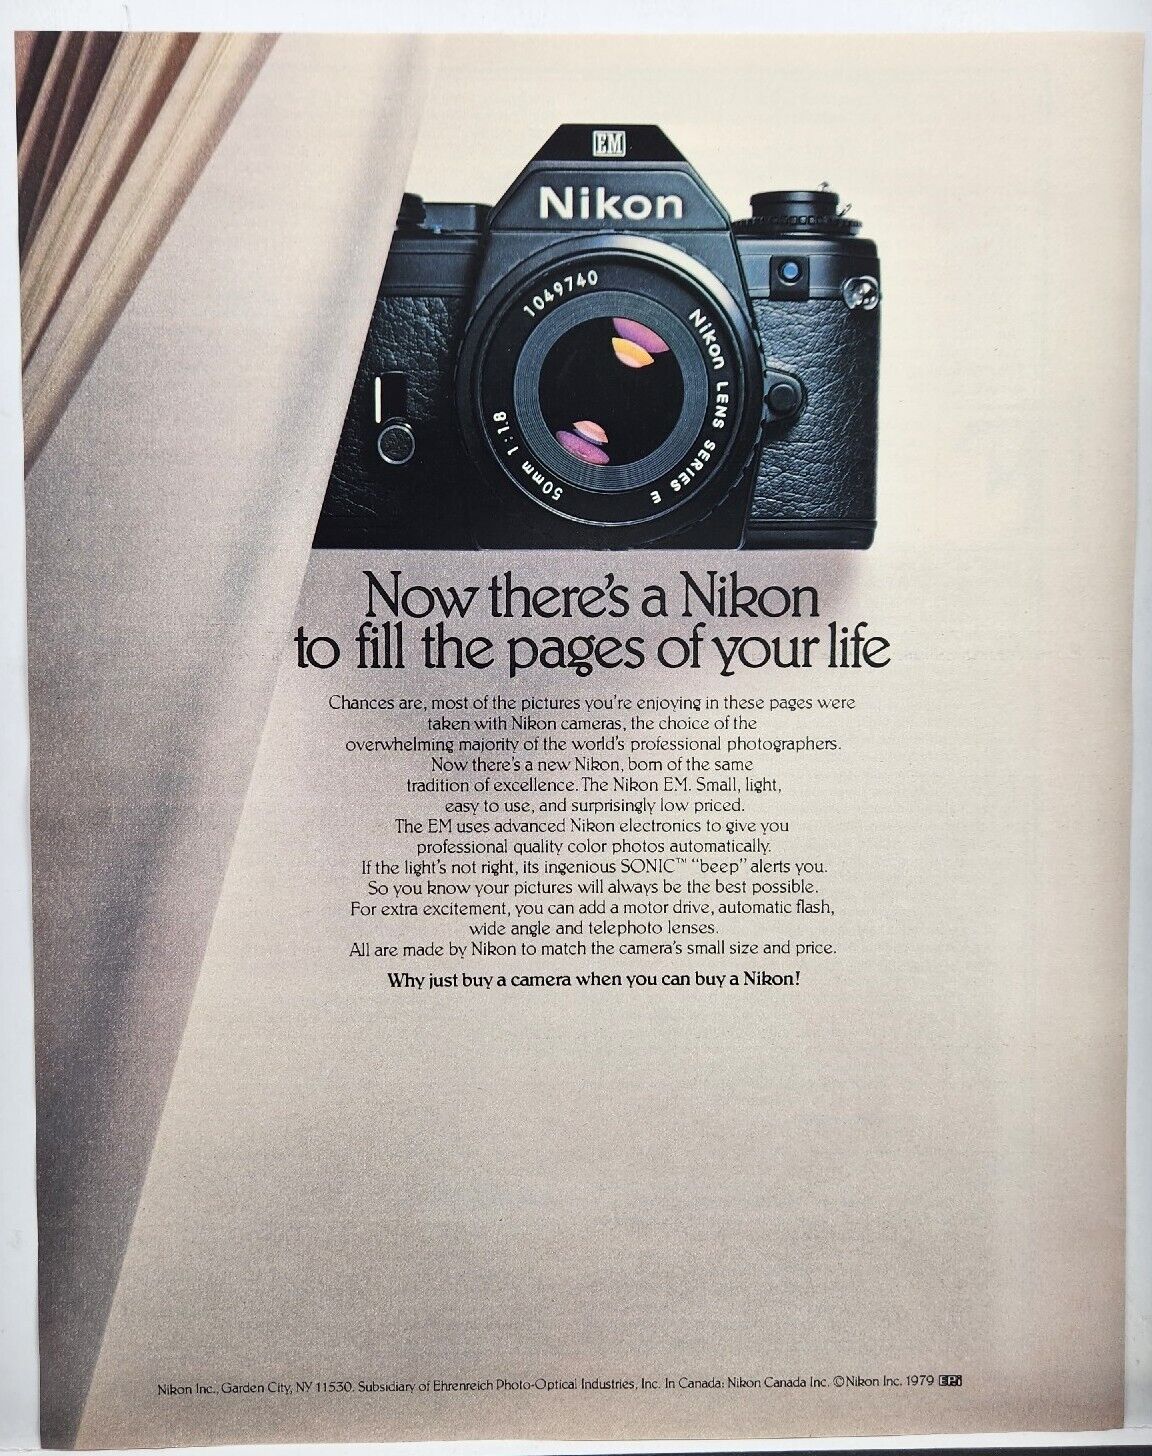 1980 Nikon EM To Fill The Pages Of Your Life Vintage Print Ad